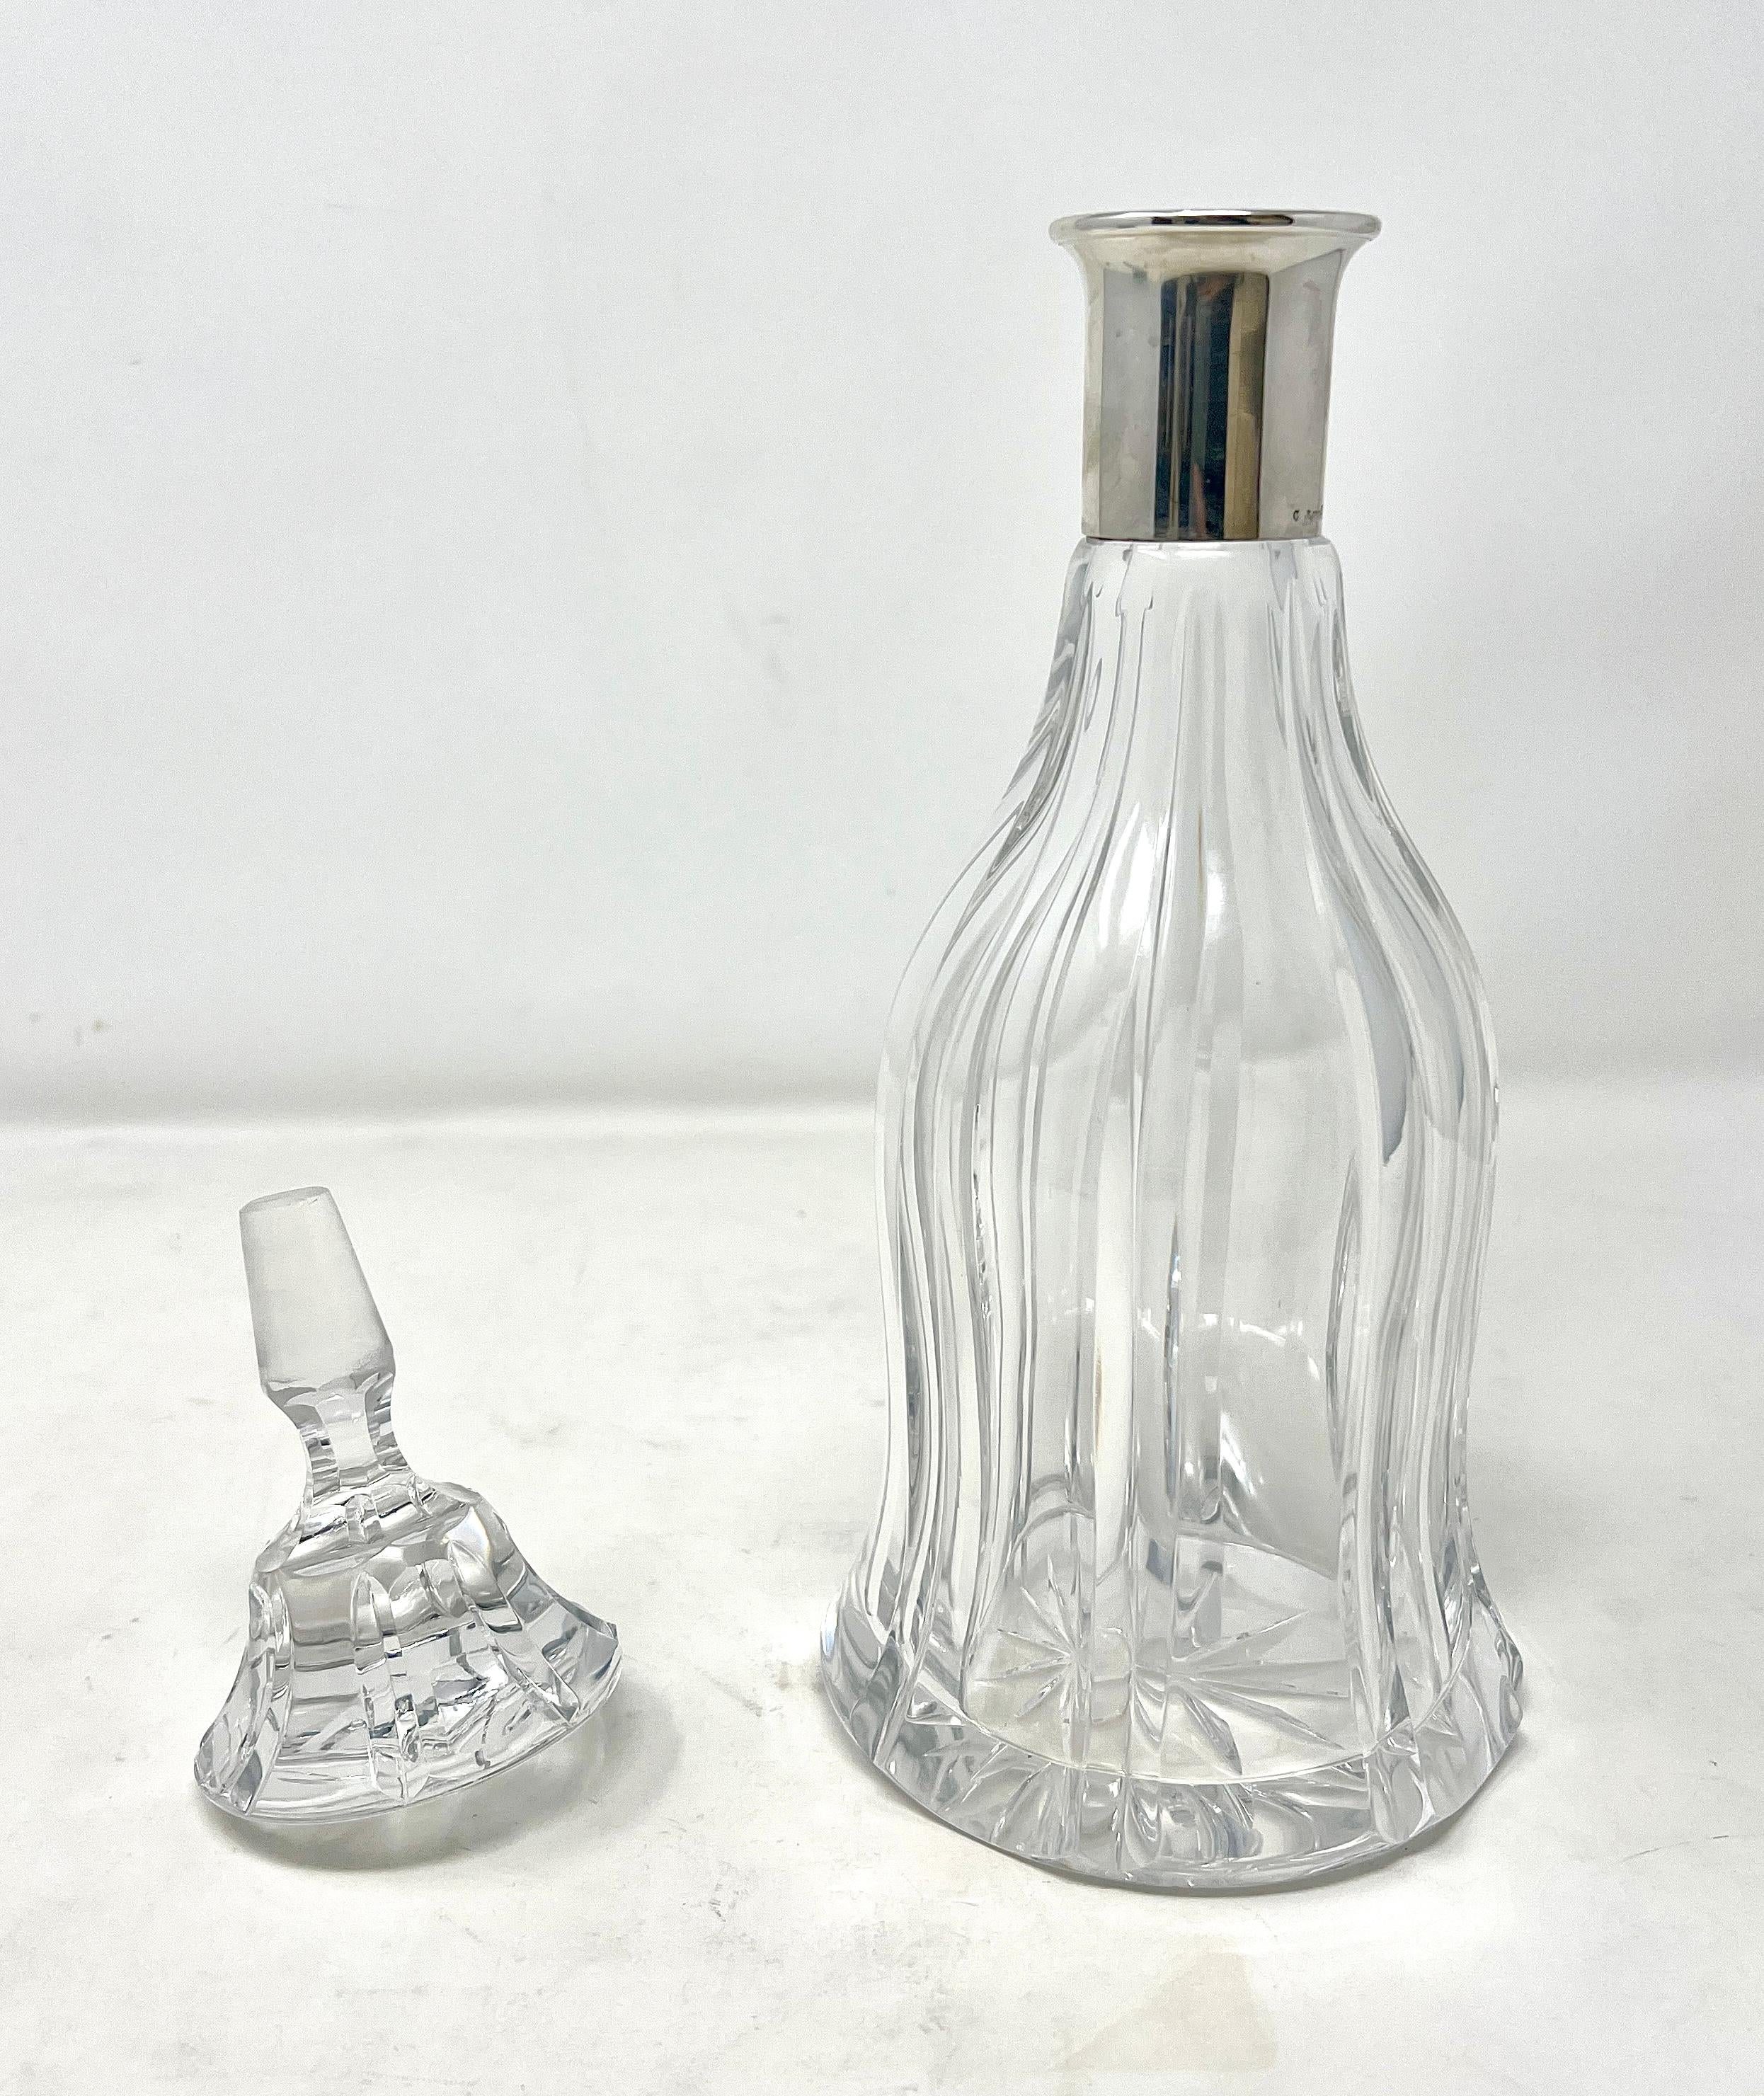 Estate Continental Sterling Silver Mounted Cut Crystal Wine Decanter, Circa 1950.
